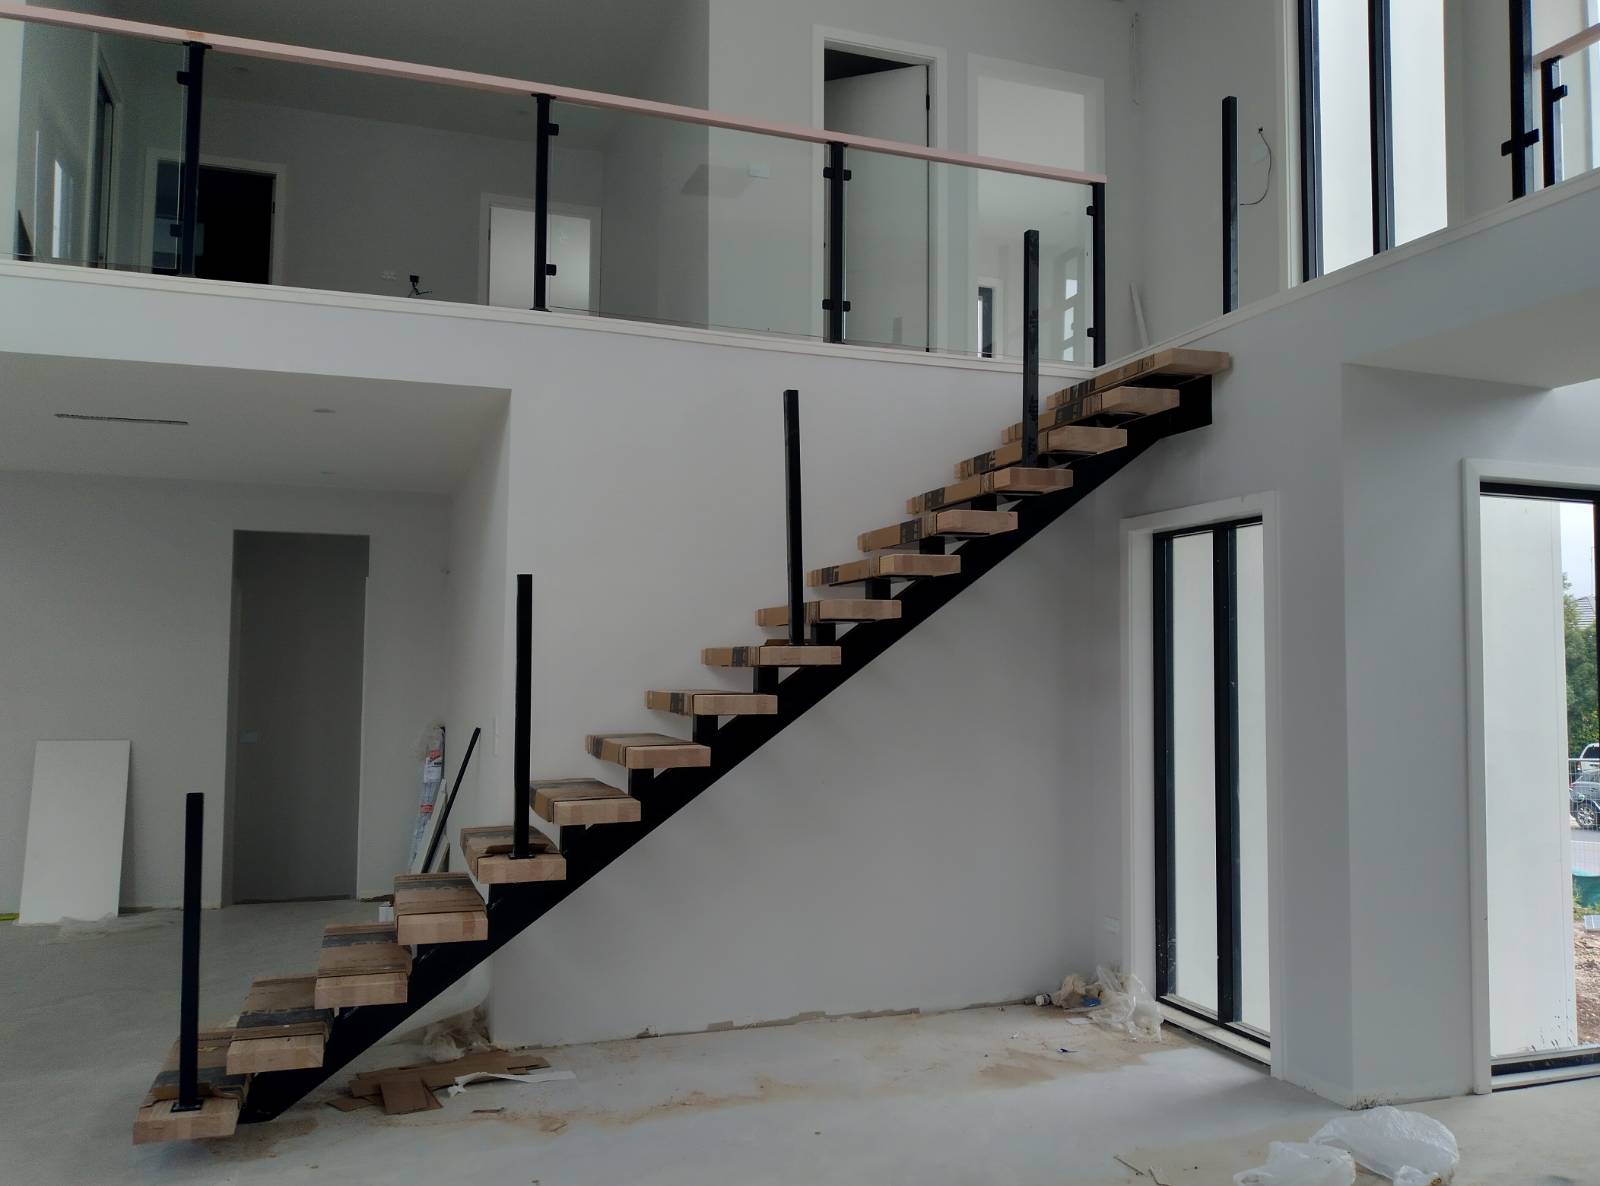 How many stairs without balustrade? Requirement for OC